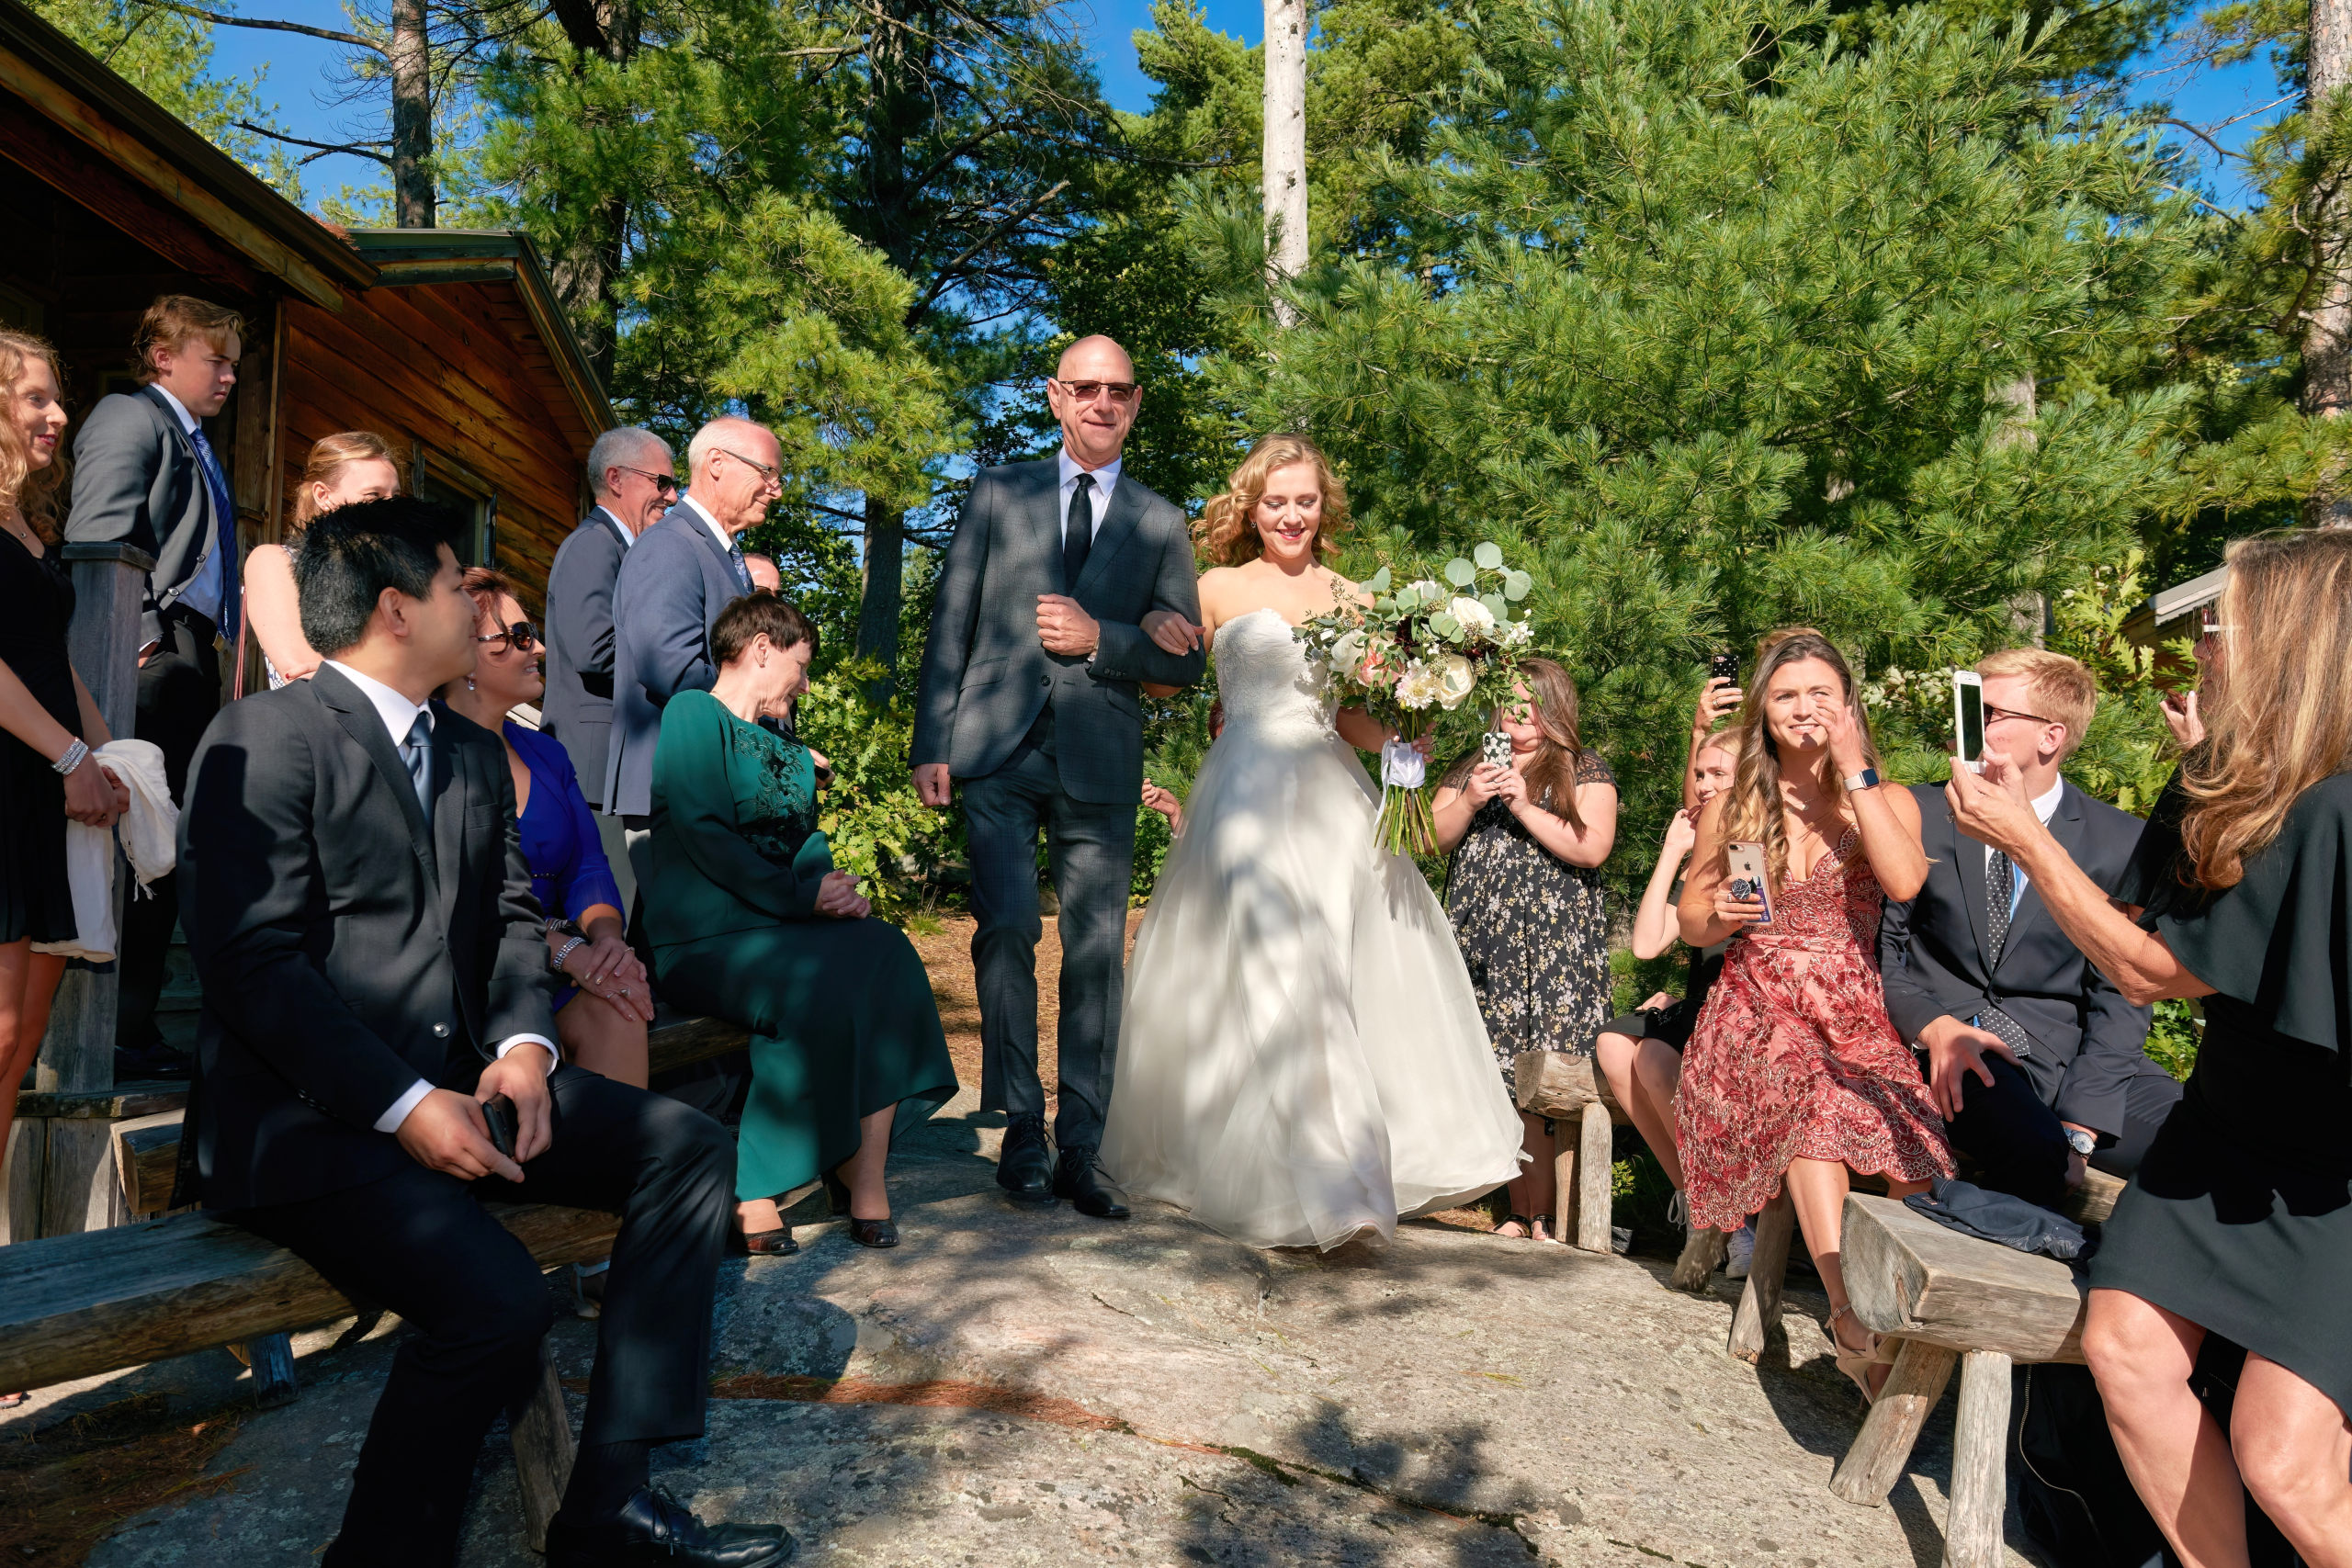 A bride walks arm in arm with her father towards the wedding alter at an outdoor wedding ceremony in French River, Ontario